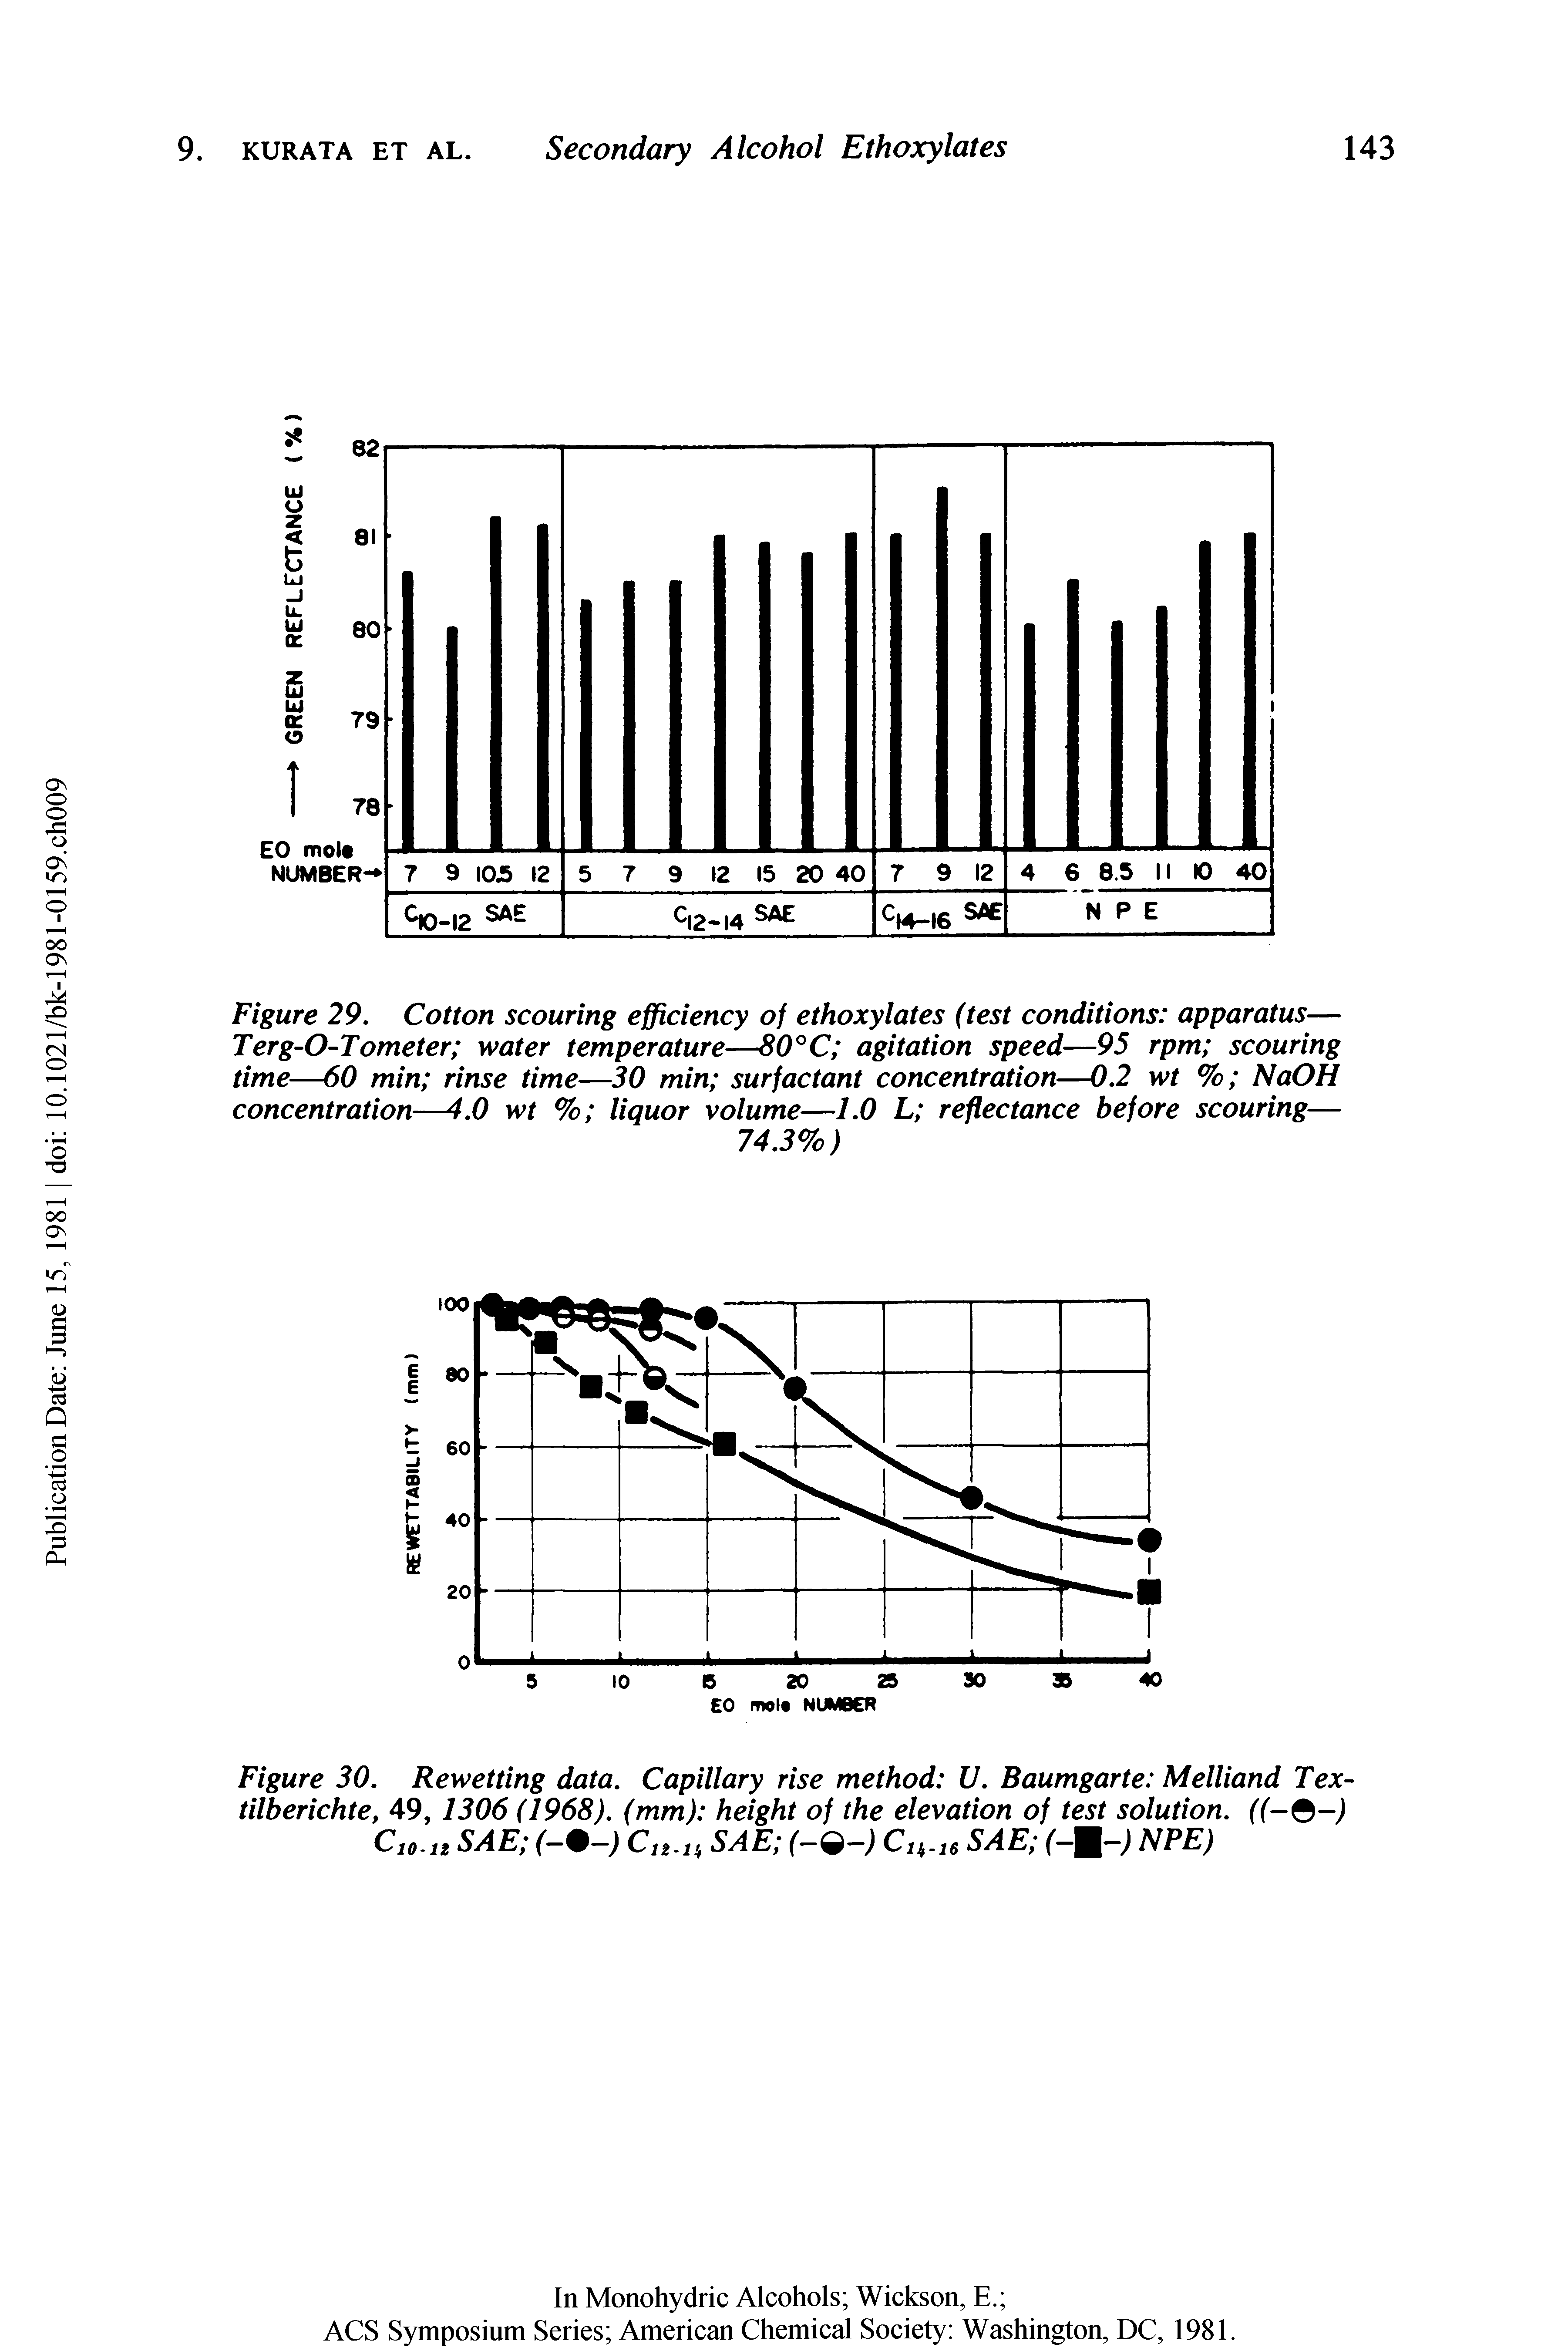 Figure 30. Rewetting data. Capillary rise method U. Baumgarte Melliand Tex-tilberichte, 49, 1306 (1968). (mm) height of the elevation of test solution. ((- -) Cto-i SAE (- -) Cn-n SAE (-Q-) C1Jf.16 SAE (-M ) NPE)...